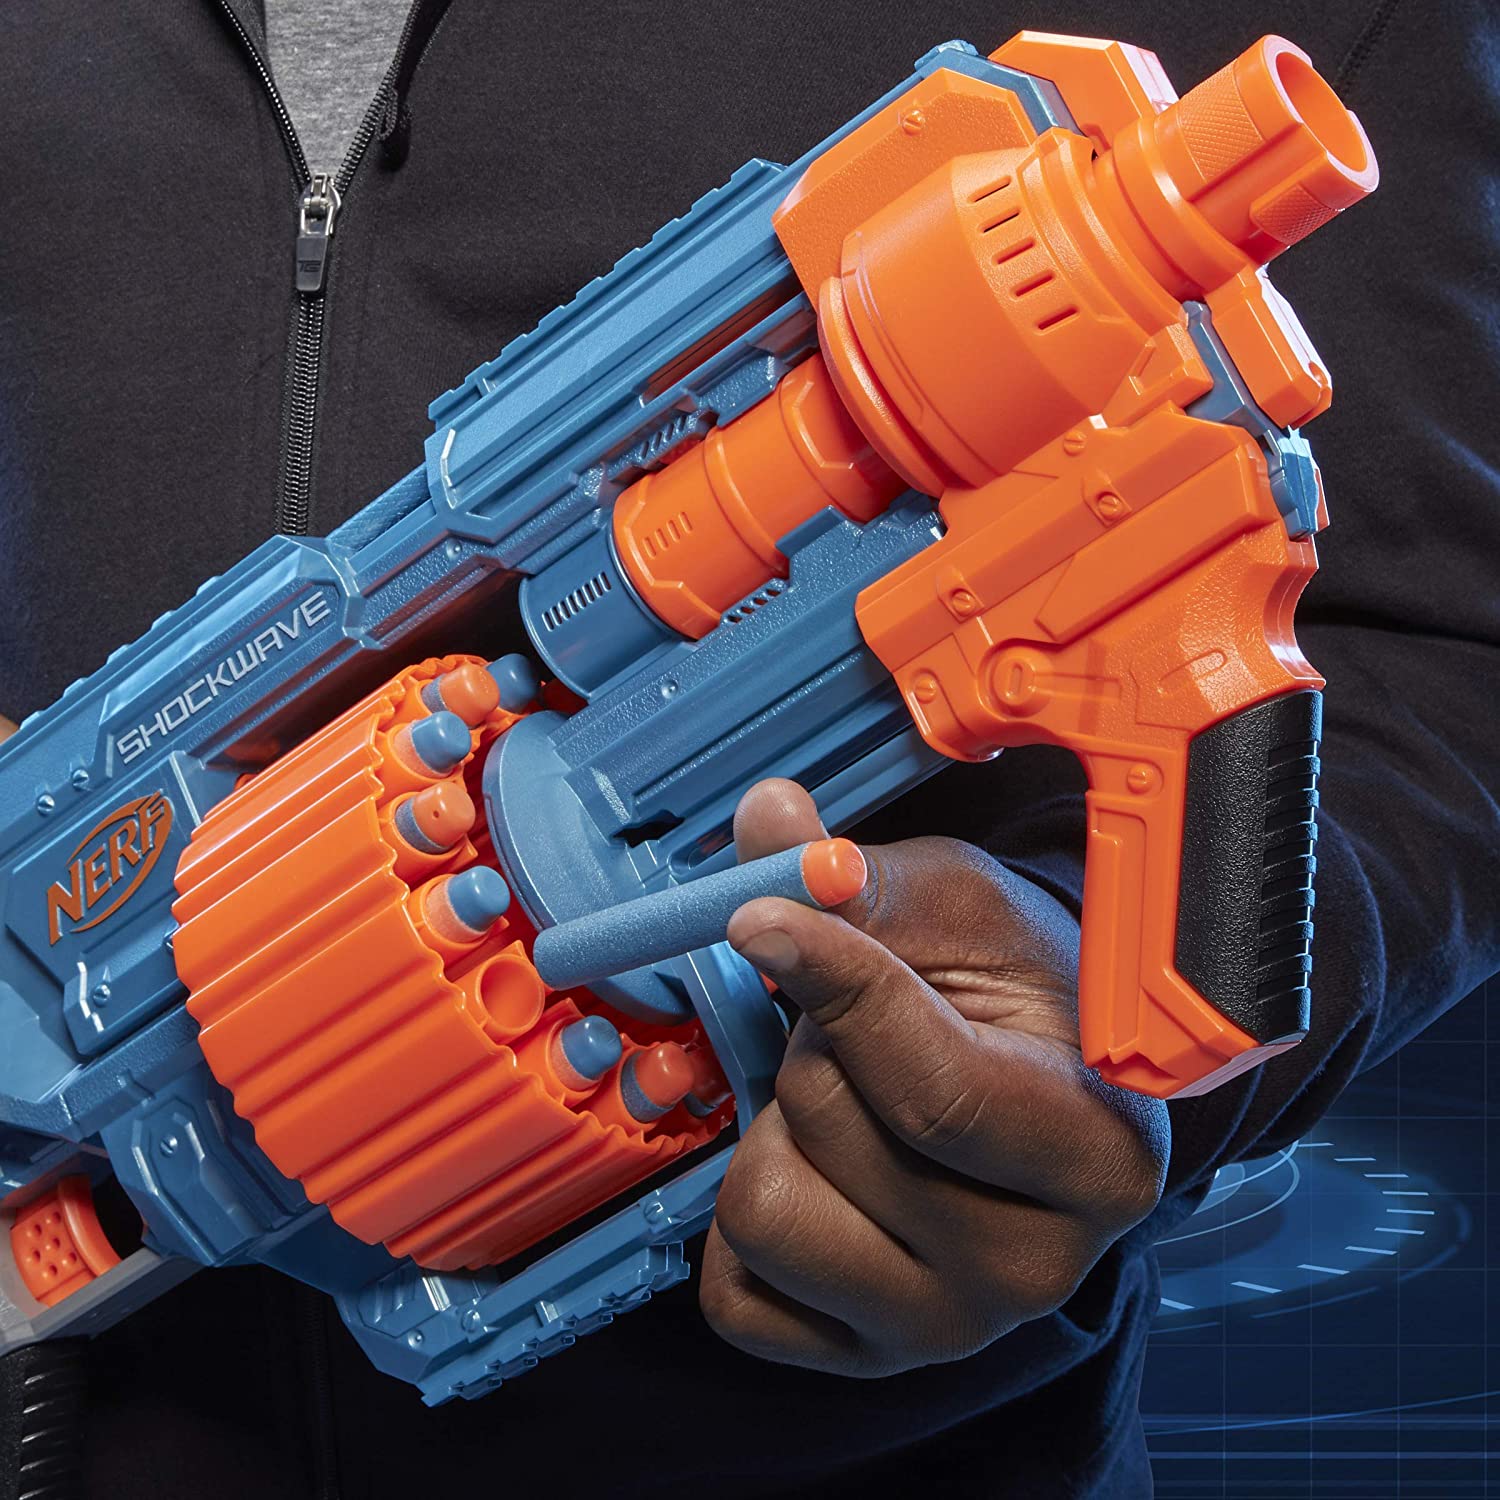 NERF Elite 2.0 Shockwave RD-15 Blaster - with 30 Official Nerf Darts To Fully Load The 15-Dart Rotating Drum And 15 More Darts For Reloading